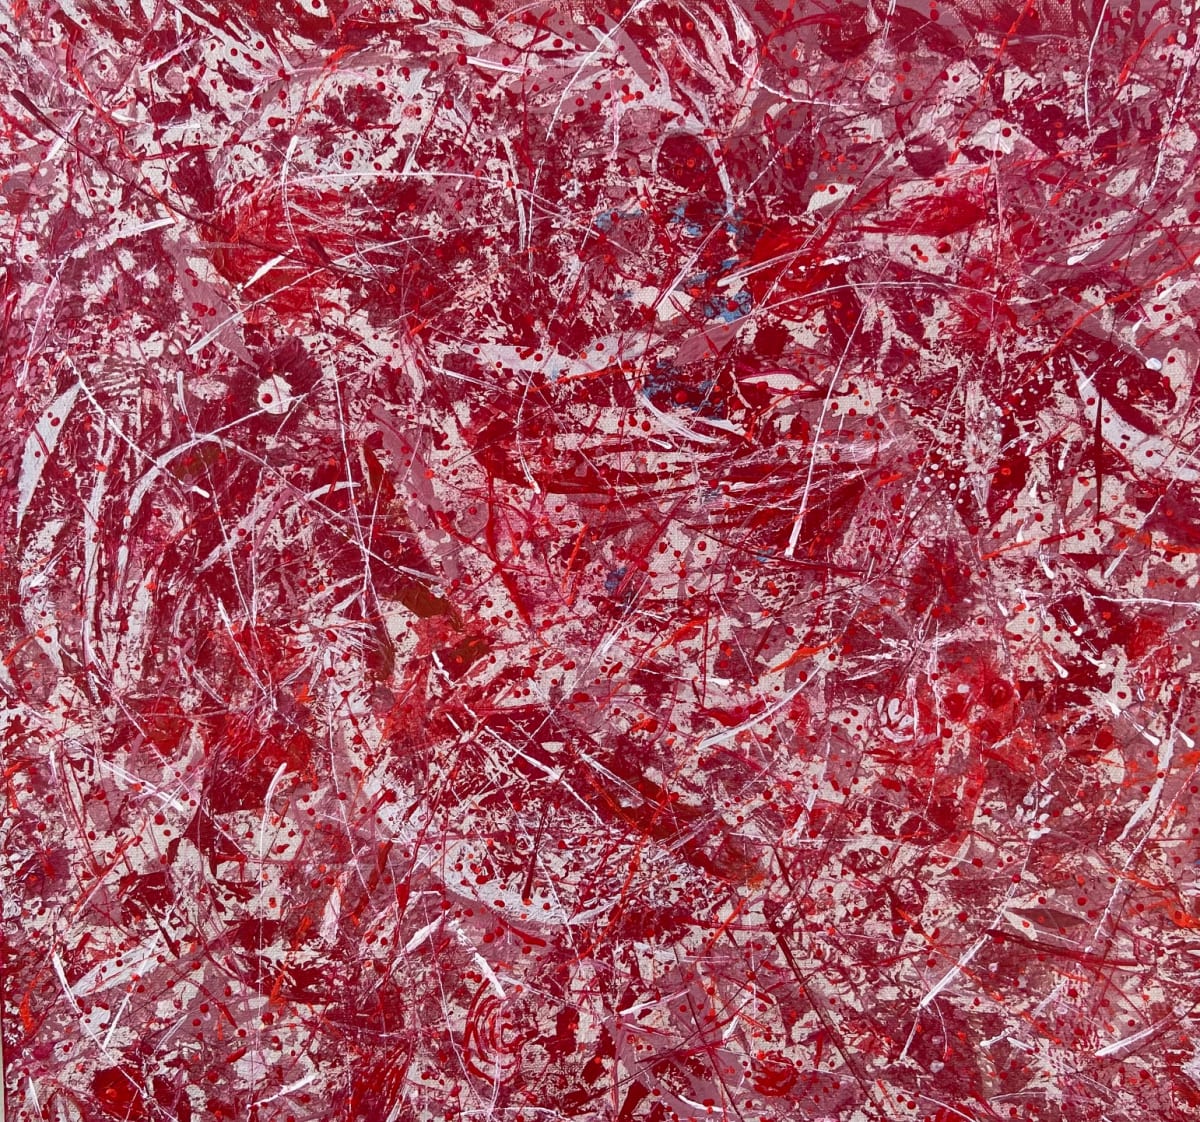 Group-Intricate Red # 1 by Freddie Styles 